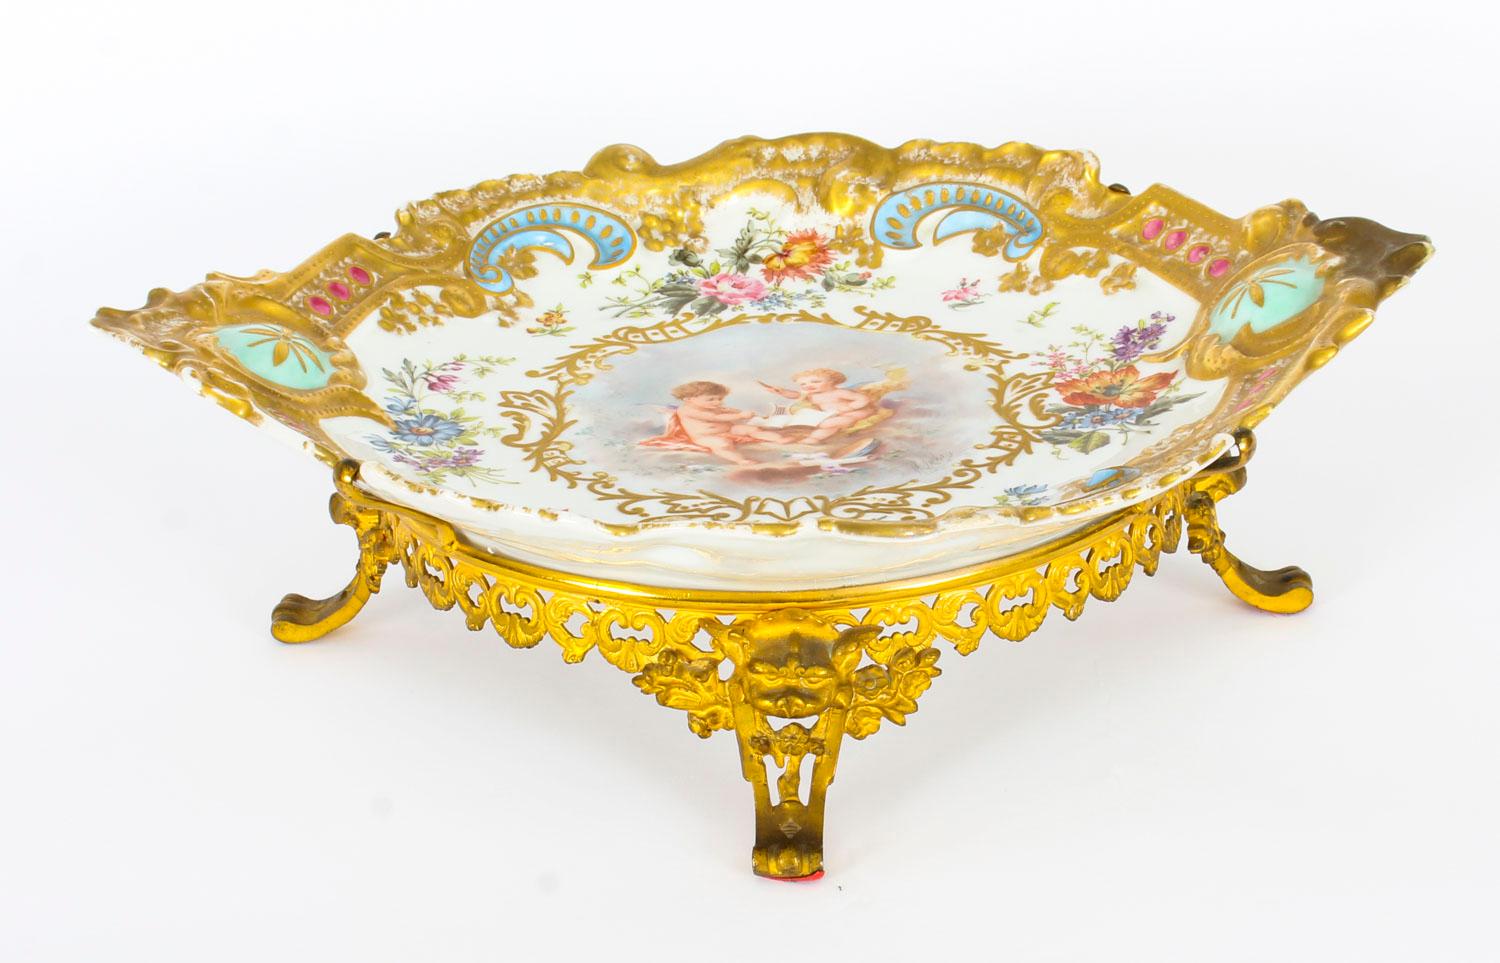 This is an impressive and highly decorative French porcelain and ormolu mounted centrepiece, mid-19th century in date.
 
It is in Limoges style and features a beautiful classical scene in the centre with cherubs surrounded by flowers in a rococo